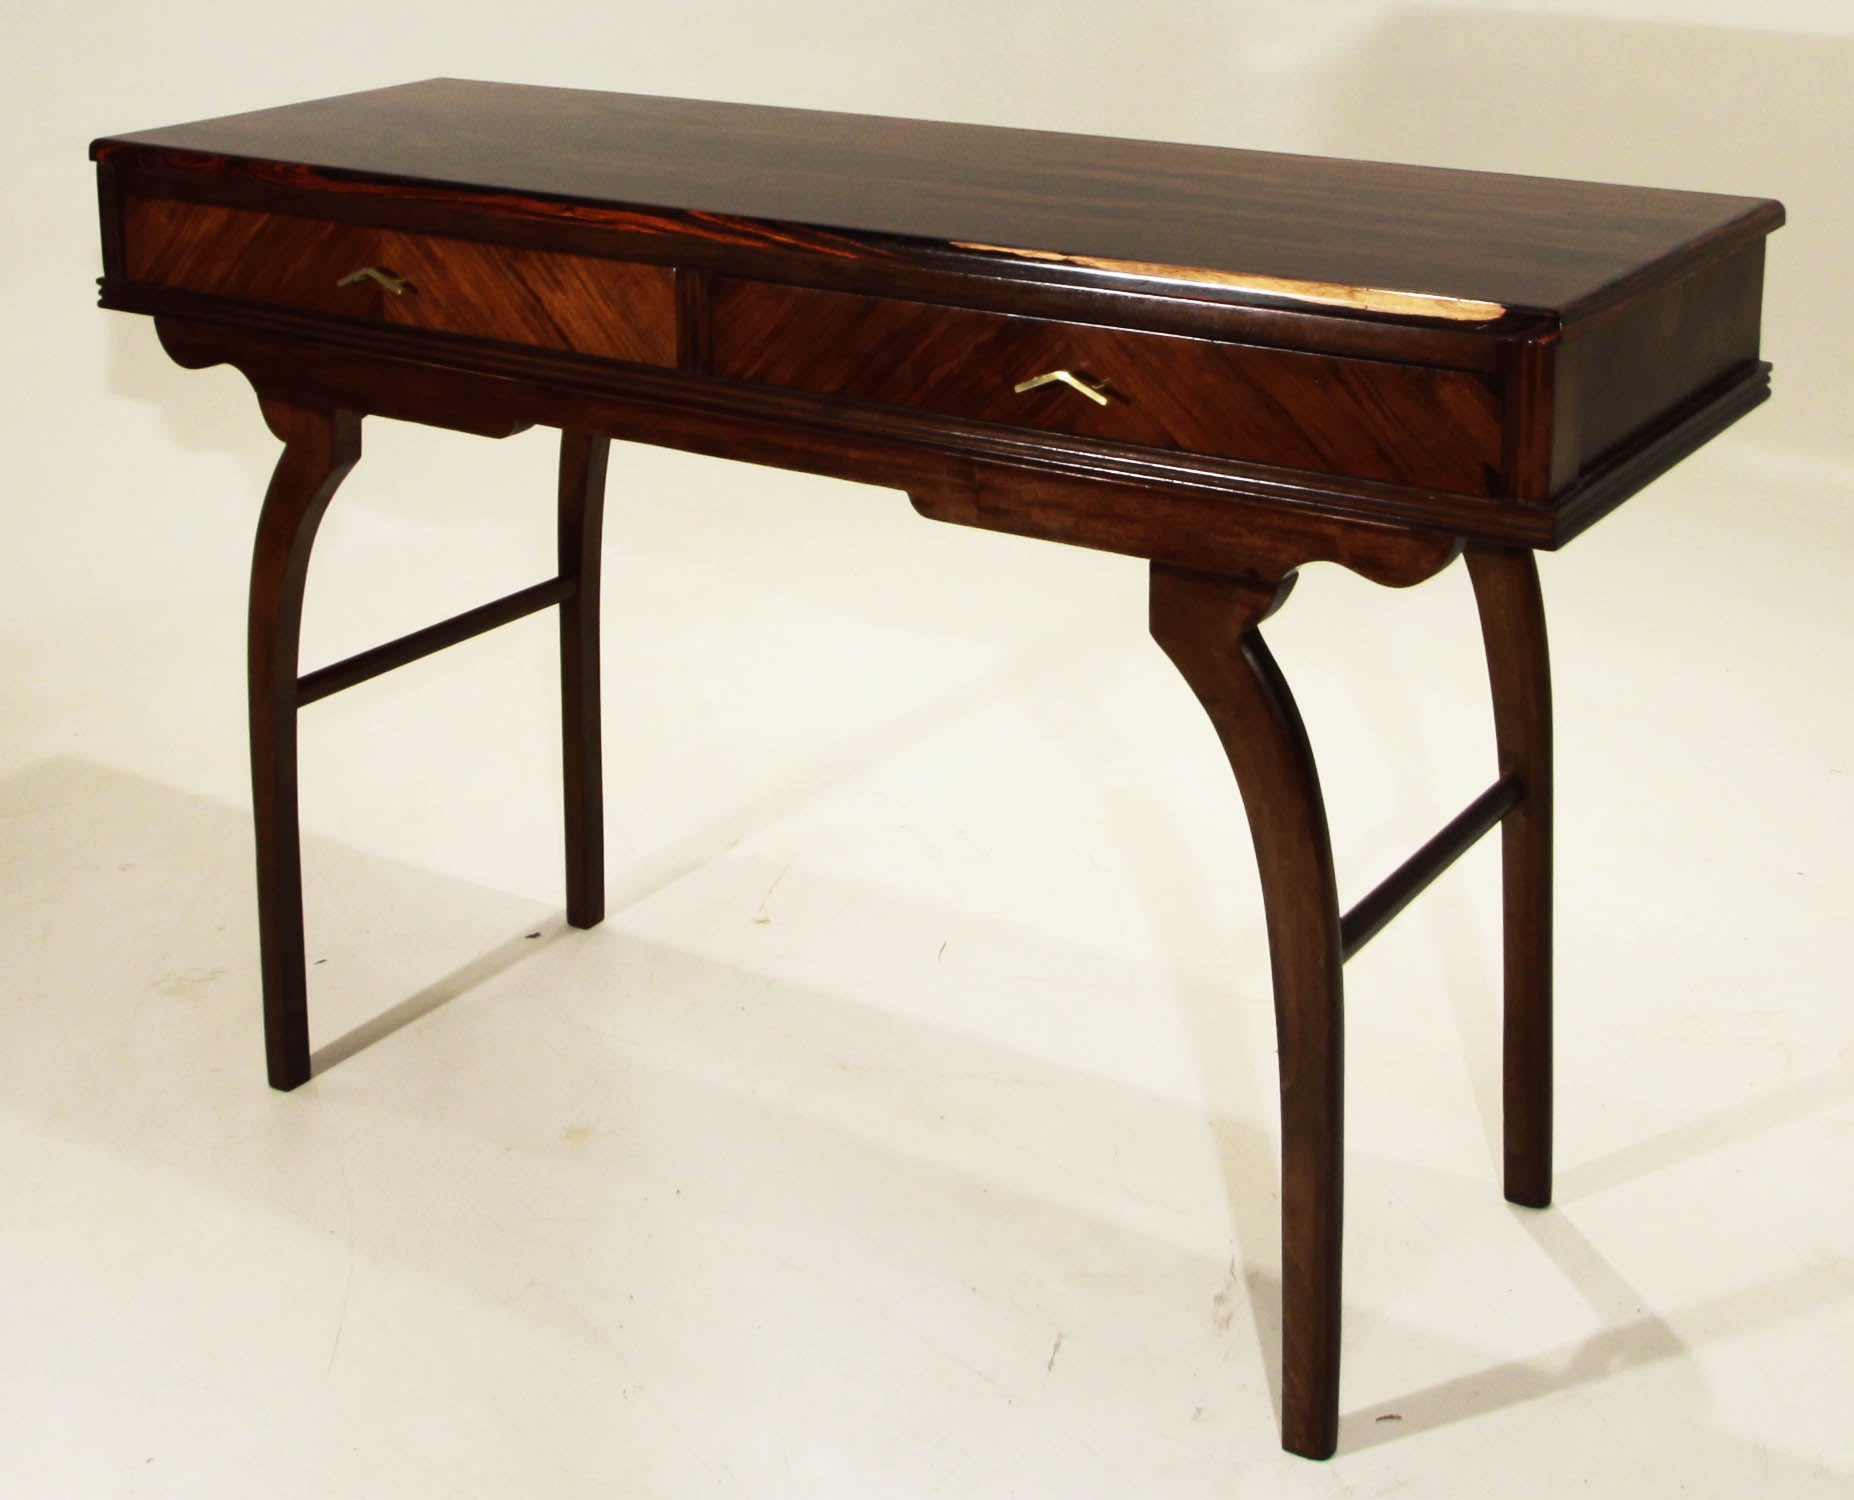 Rosewood Top Console Table Attributed to Guiseppi Scapinelli